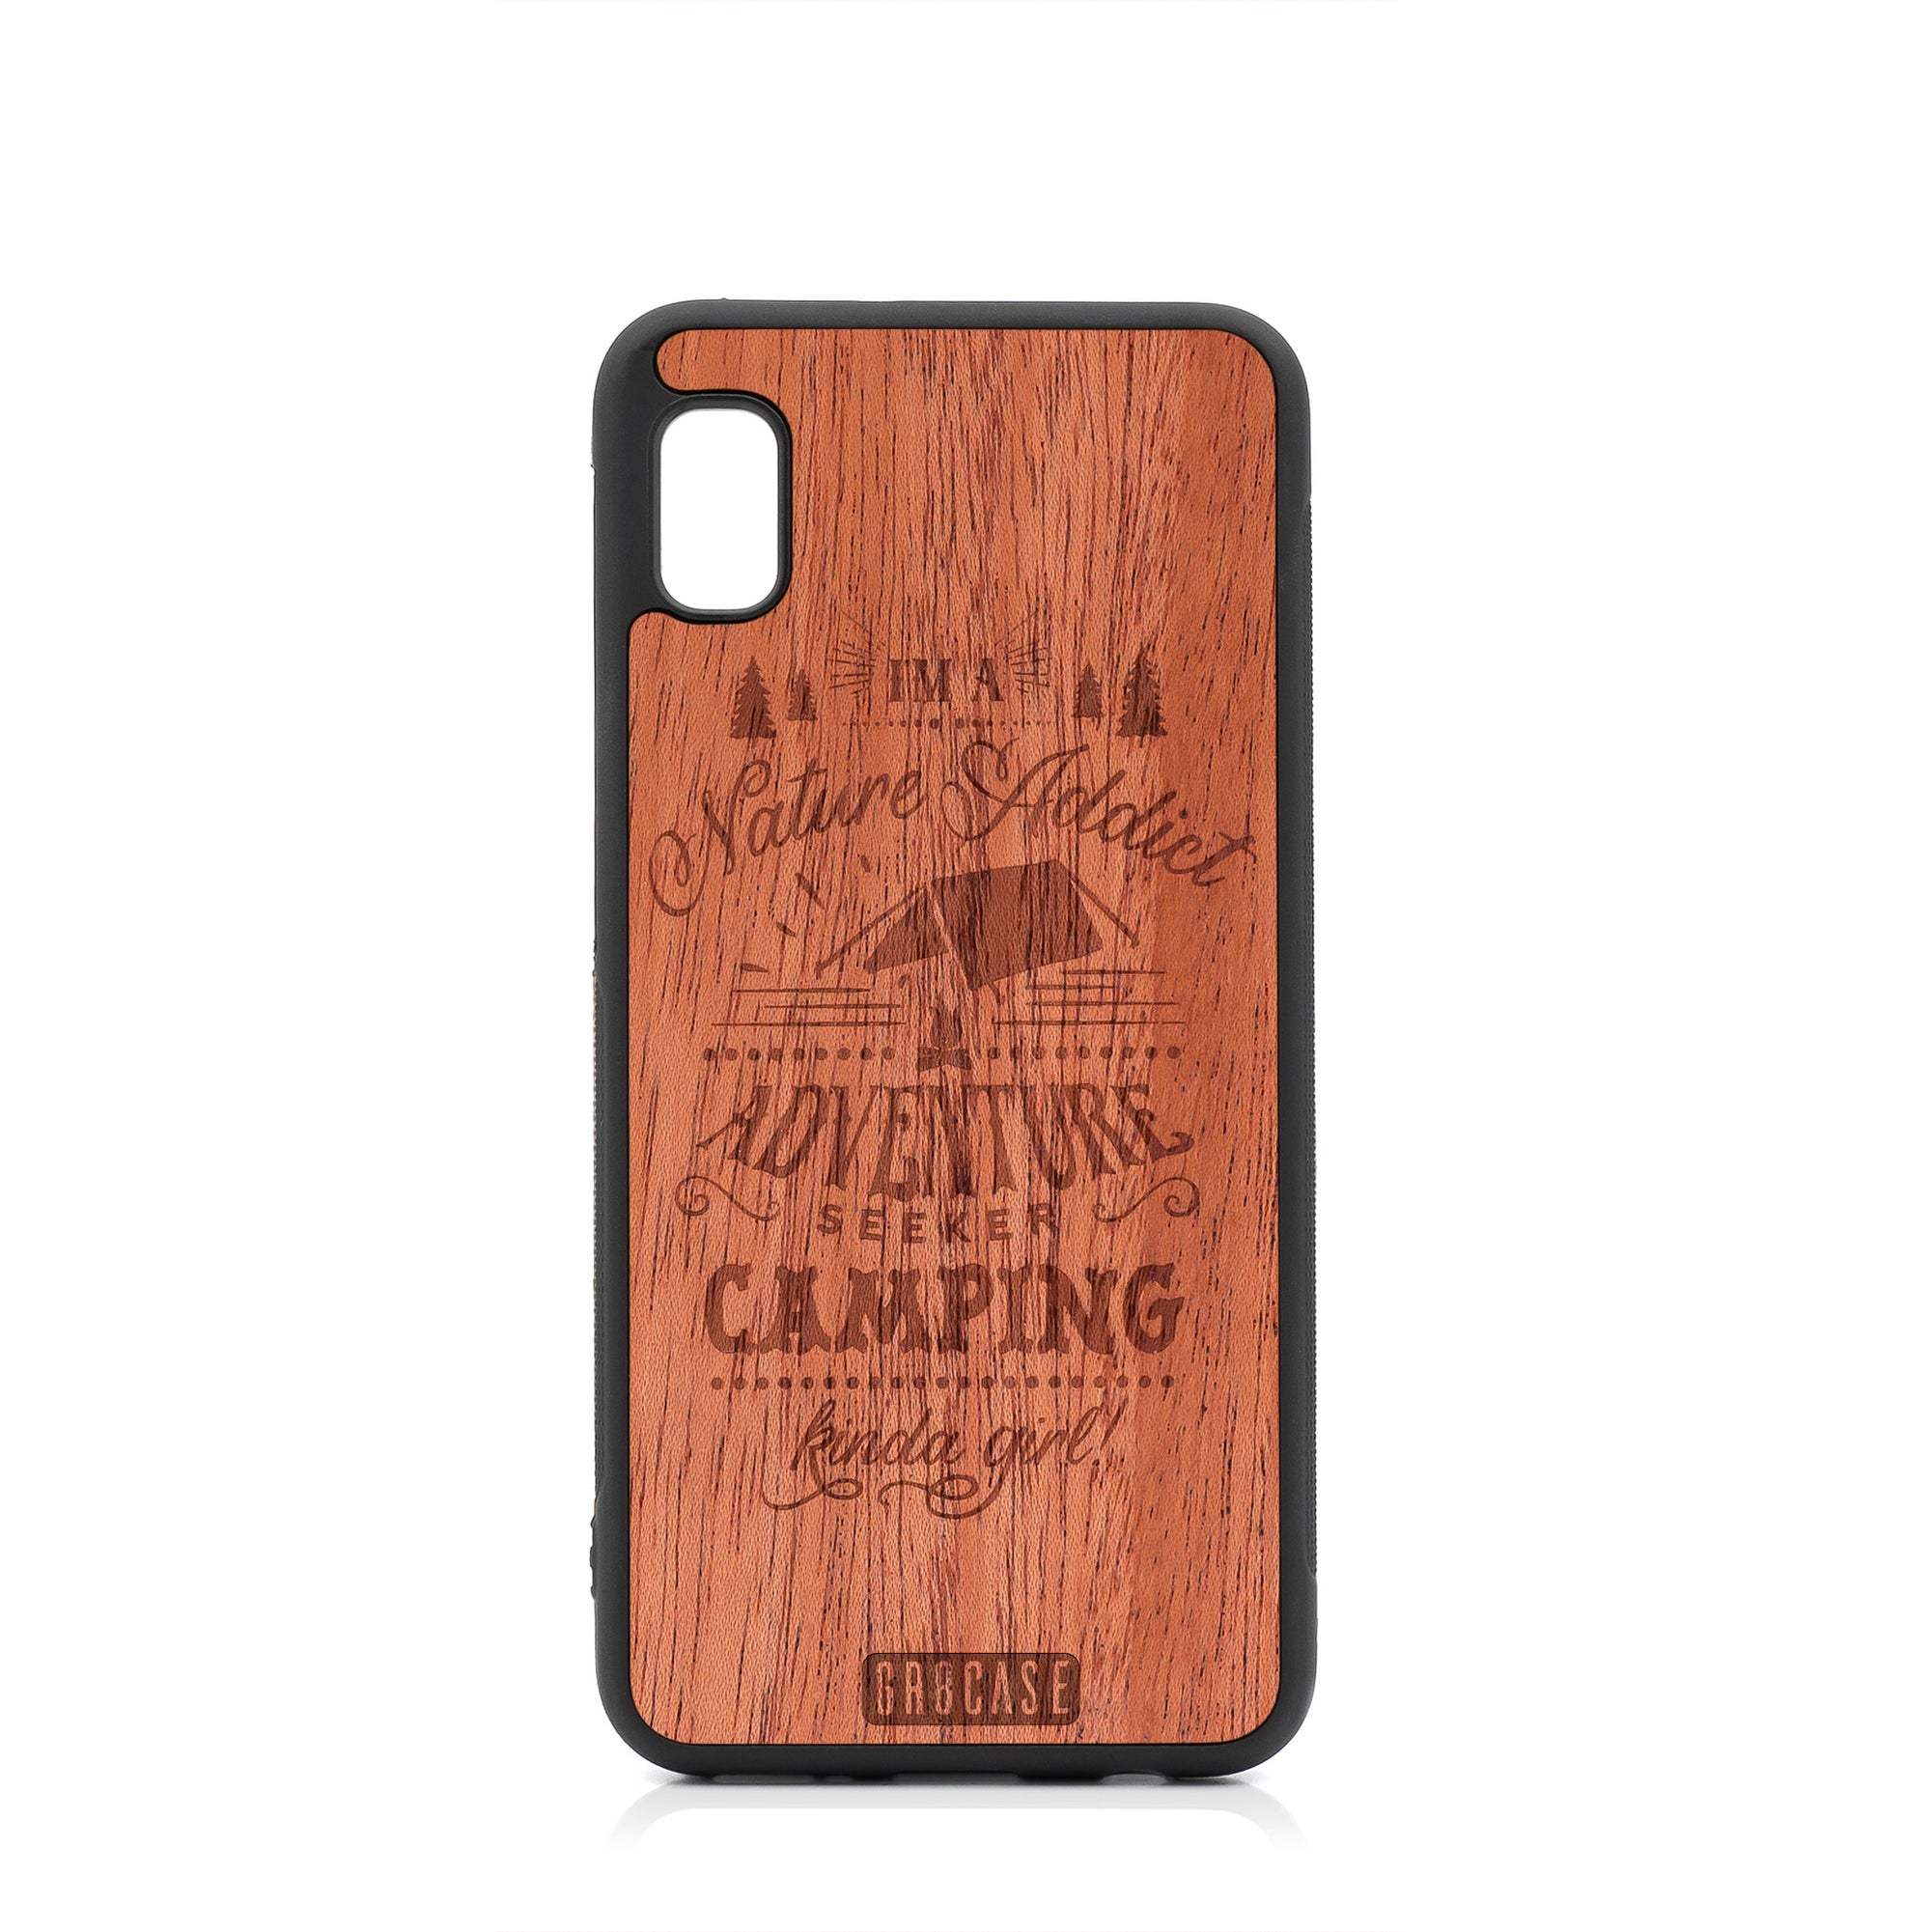 I'm A Nature Addict Adventure Seeker Camping Kinda Girl Design Wood Case For Samsung Galaxy A10E by GR8CASE